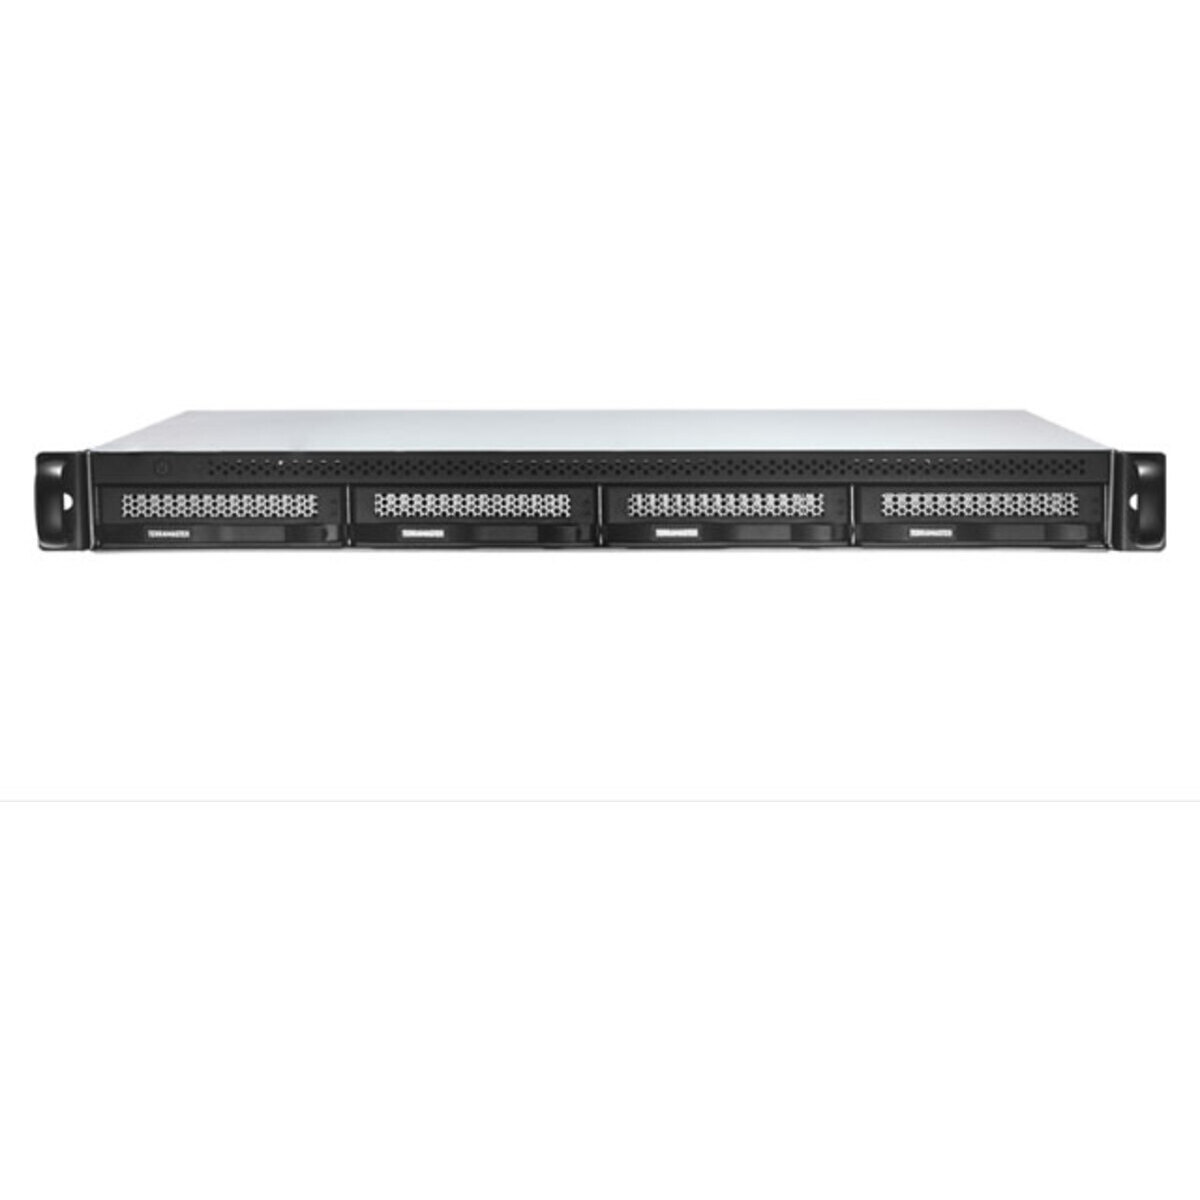 TerraMaster U4-423 28tb 4-Bay RackMount Multimedia / Power User / Business NAS - Network Attached Storage Device 2x14tb Seagate IronWolf Pro ST14000NT001 3.5 7200rpm SATA 6Gb/s HDD NAS Class Drives Installed - Burn-In Tested - FREE RAM UPGRADE U4-423